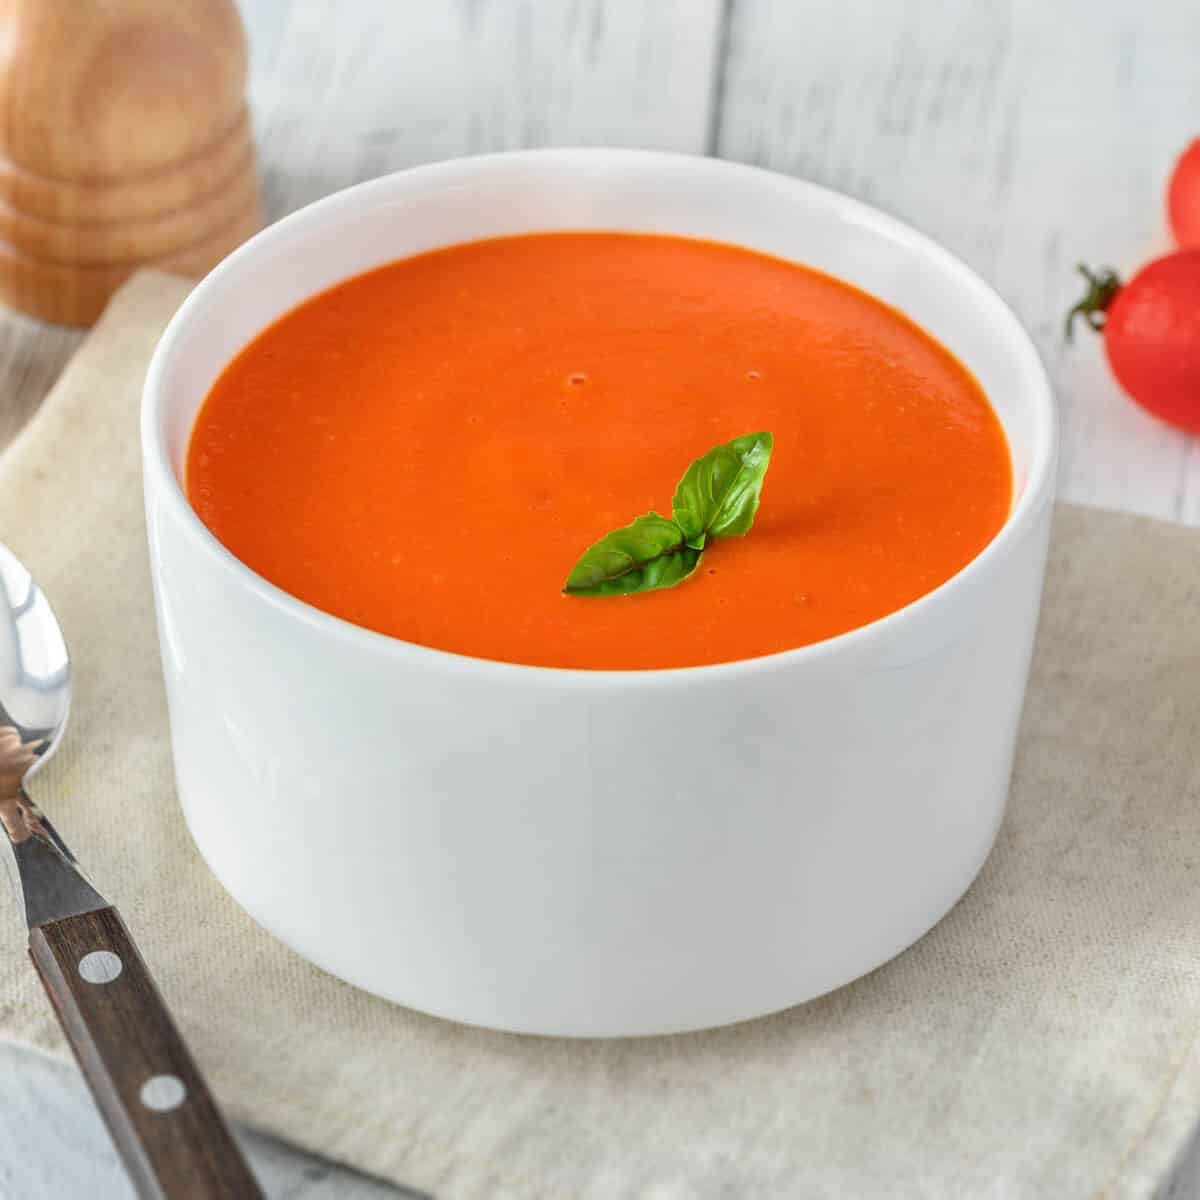 Tomato soup in a white bowl with a fresh basil leaves.